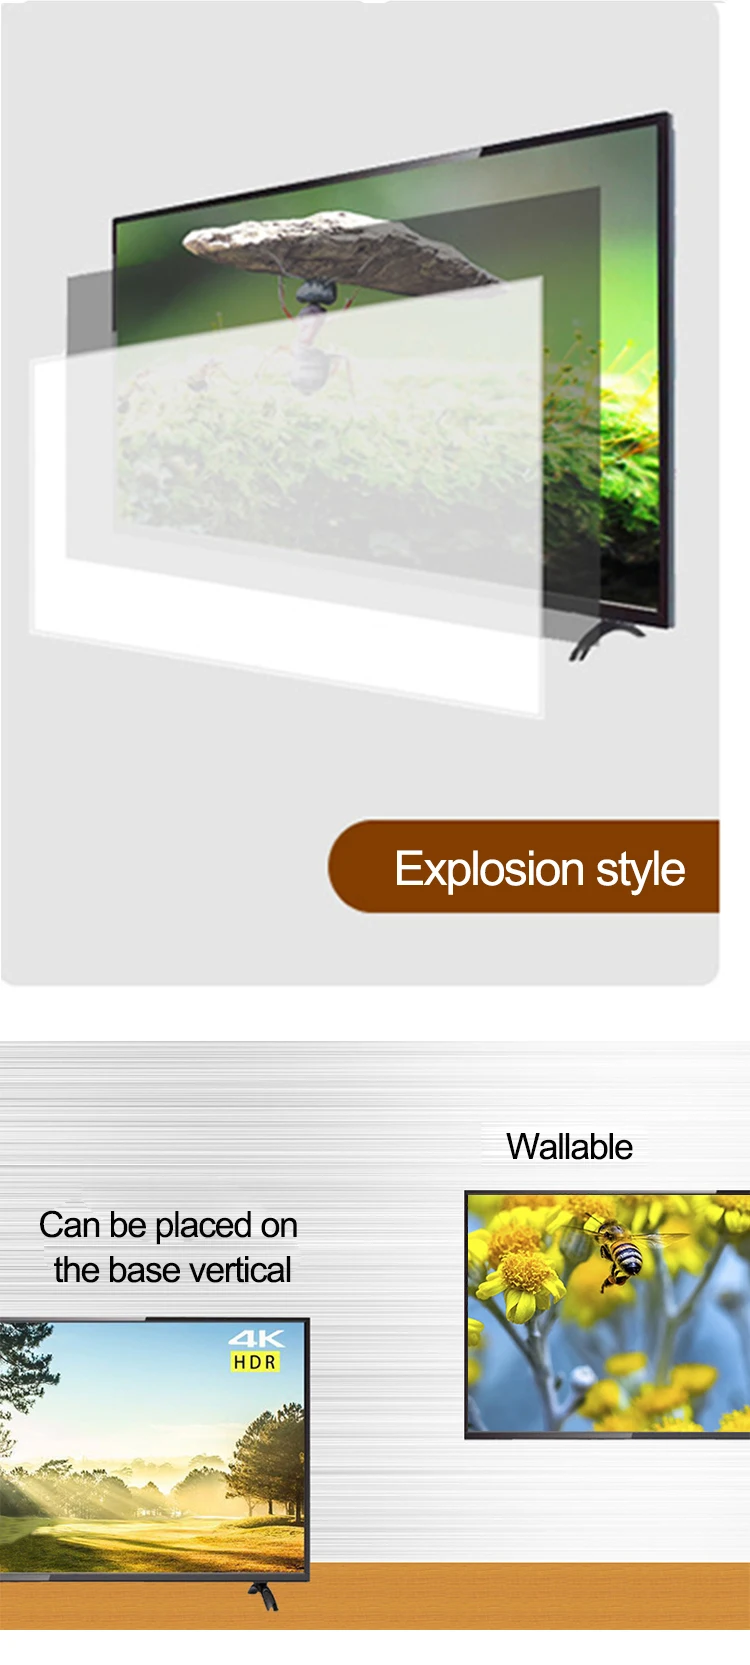 32/43/46/50/55 Inch HD Smart Network Explosion-proof LED TV Factory Cheap Flat Screen television Best smart TV